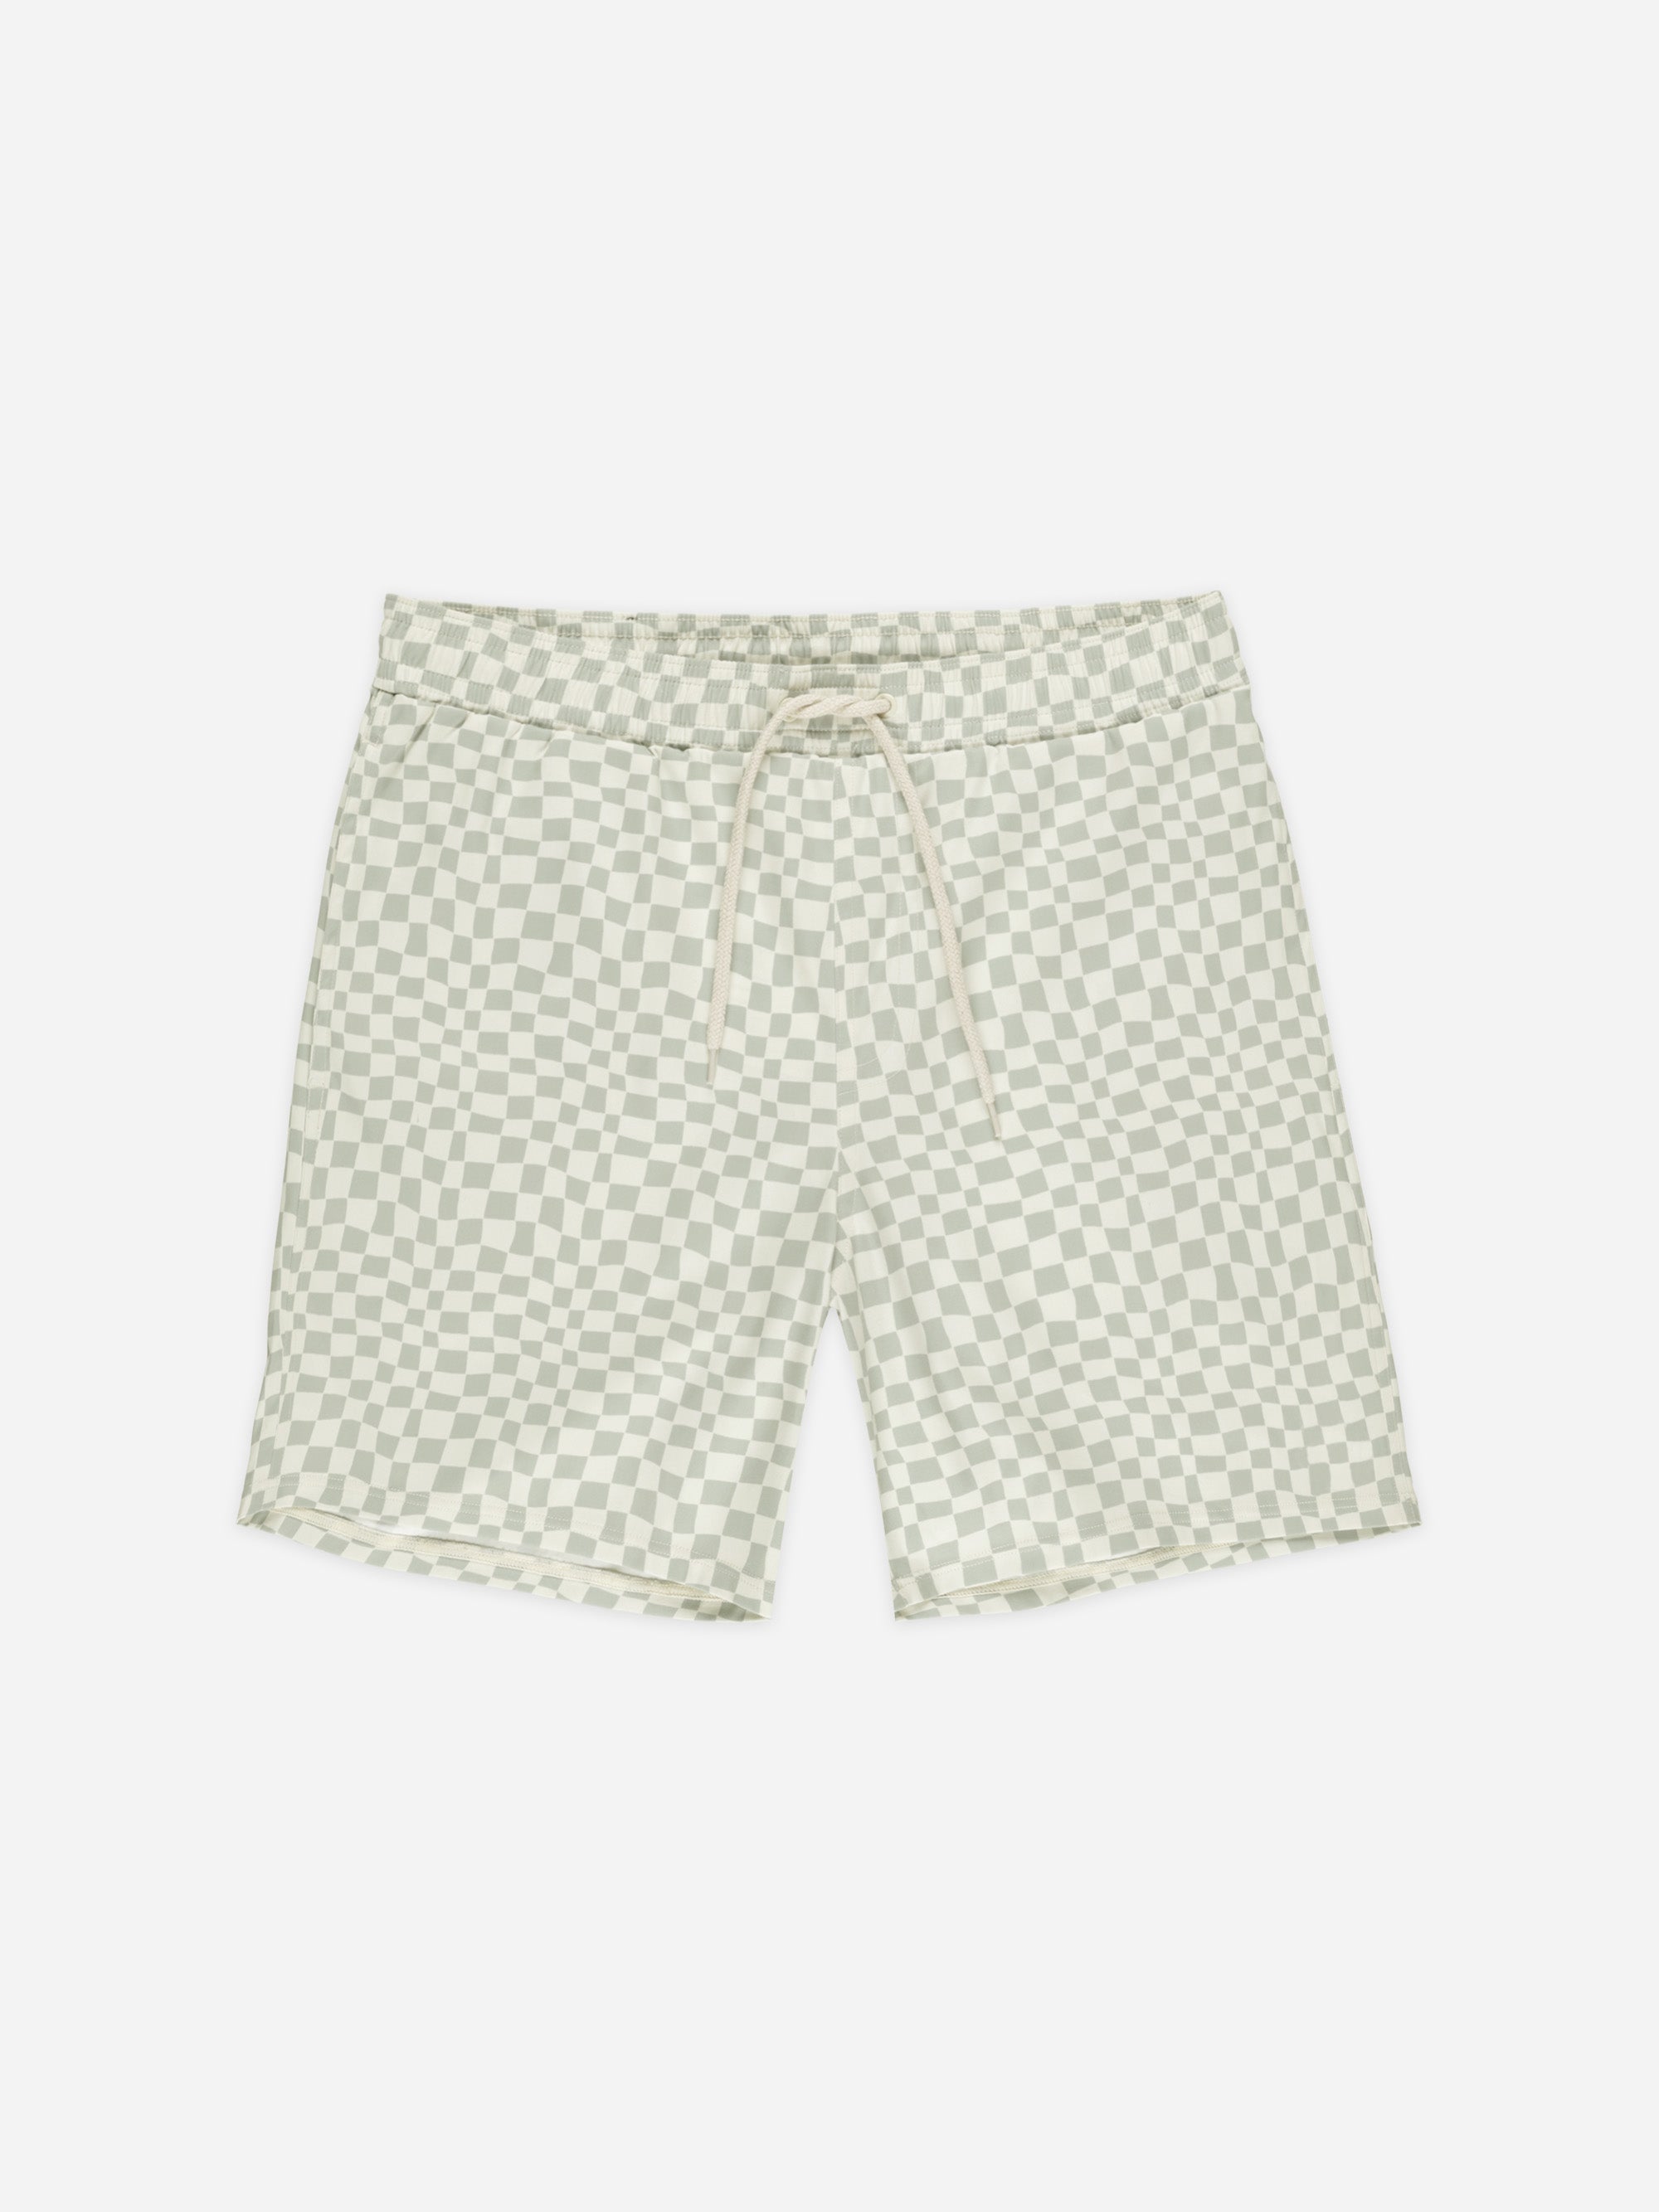 Basic Boardshort | Seafoam Check - Rylee + Cru | Kids Clothes | Trendy Baby Clothes | Modern Infant Outfits |